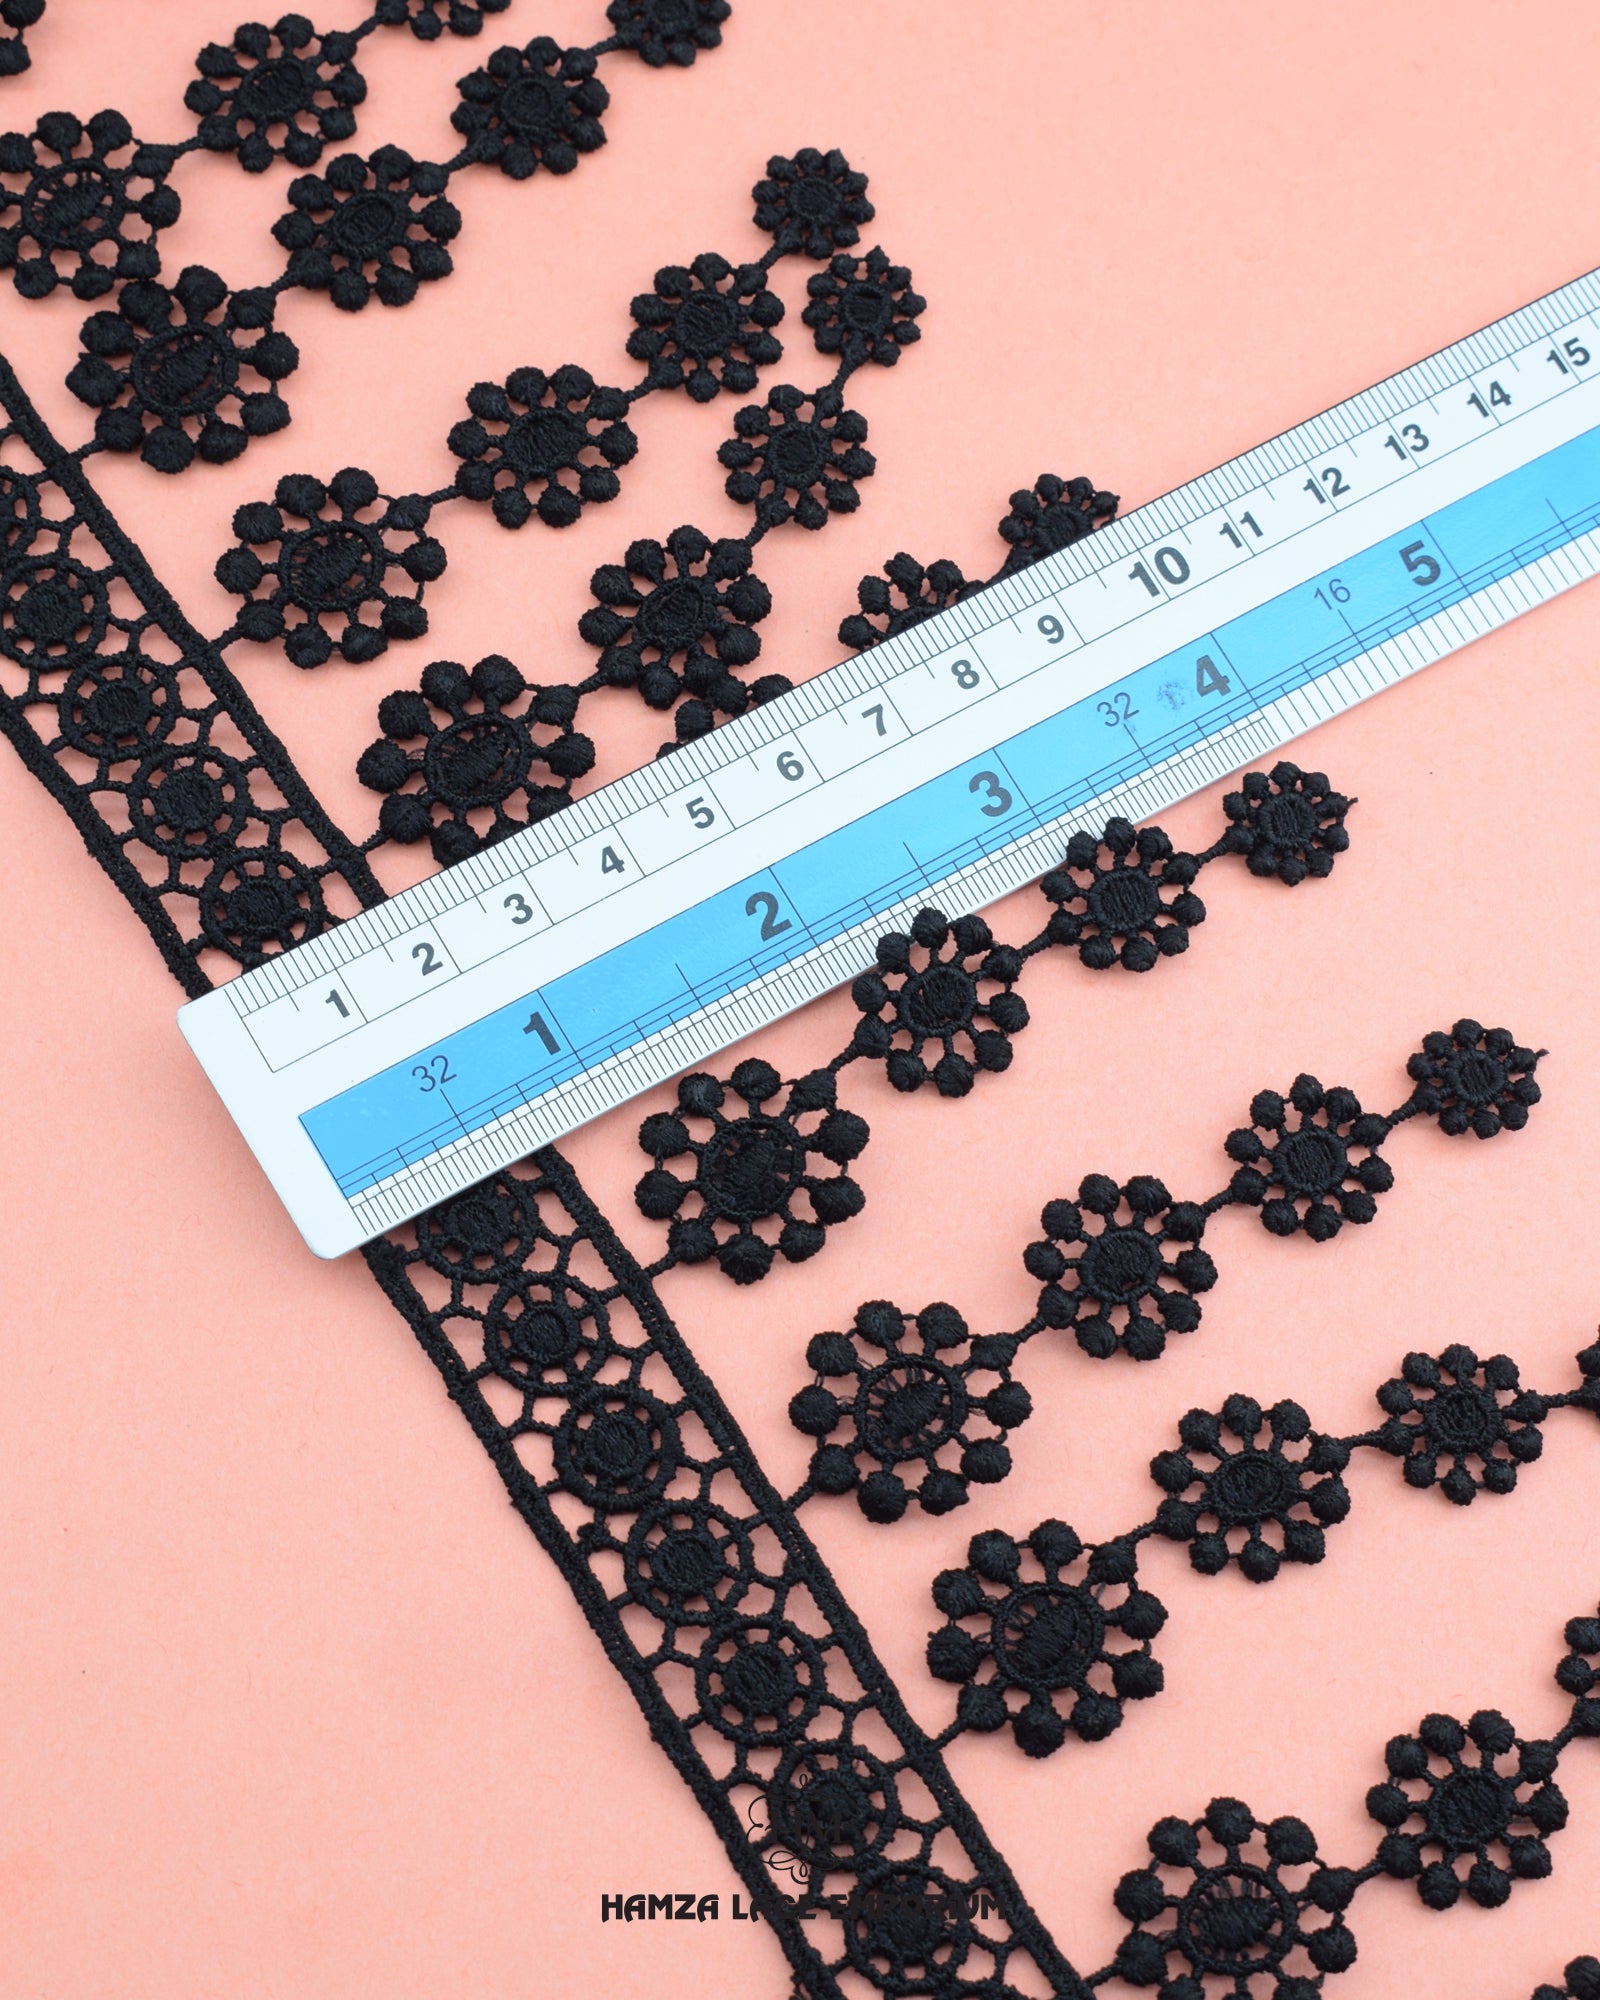 Using a scale, the size of the 'Edging Jhalar Lace 583' is shown